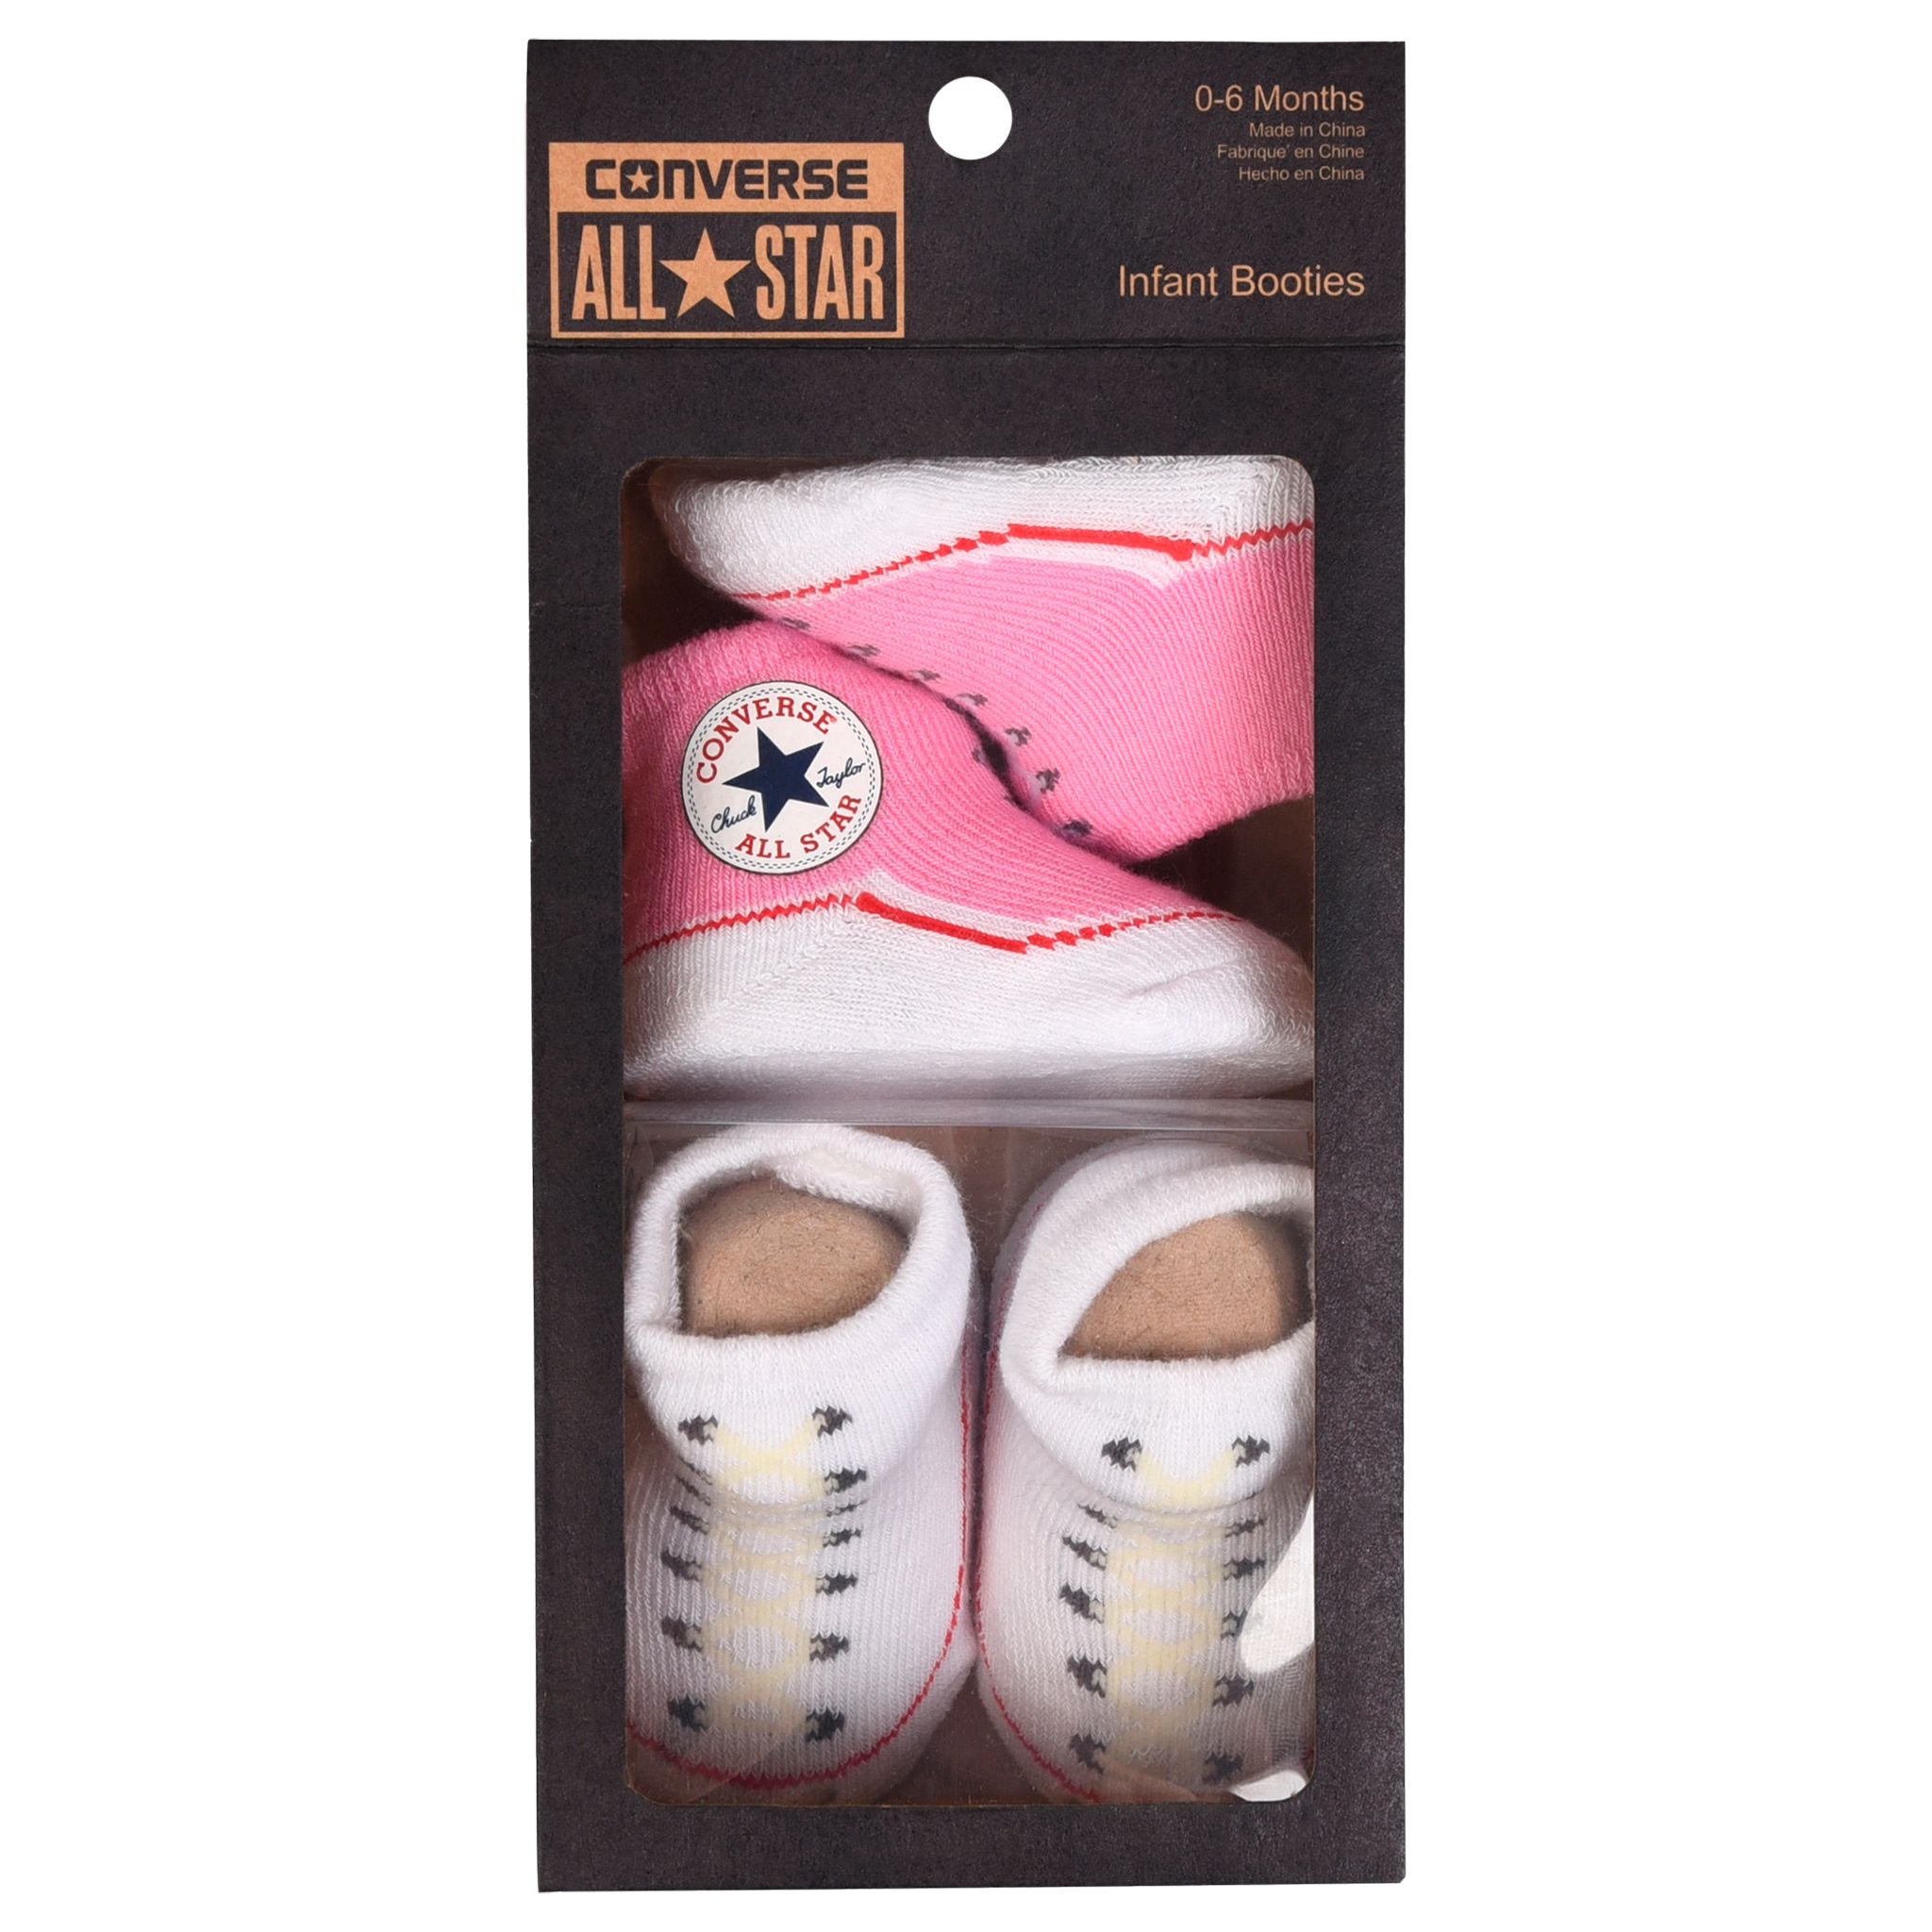 converse infant booties 0 6 months